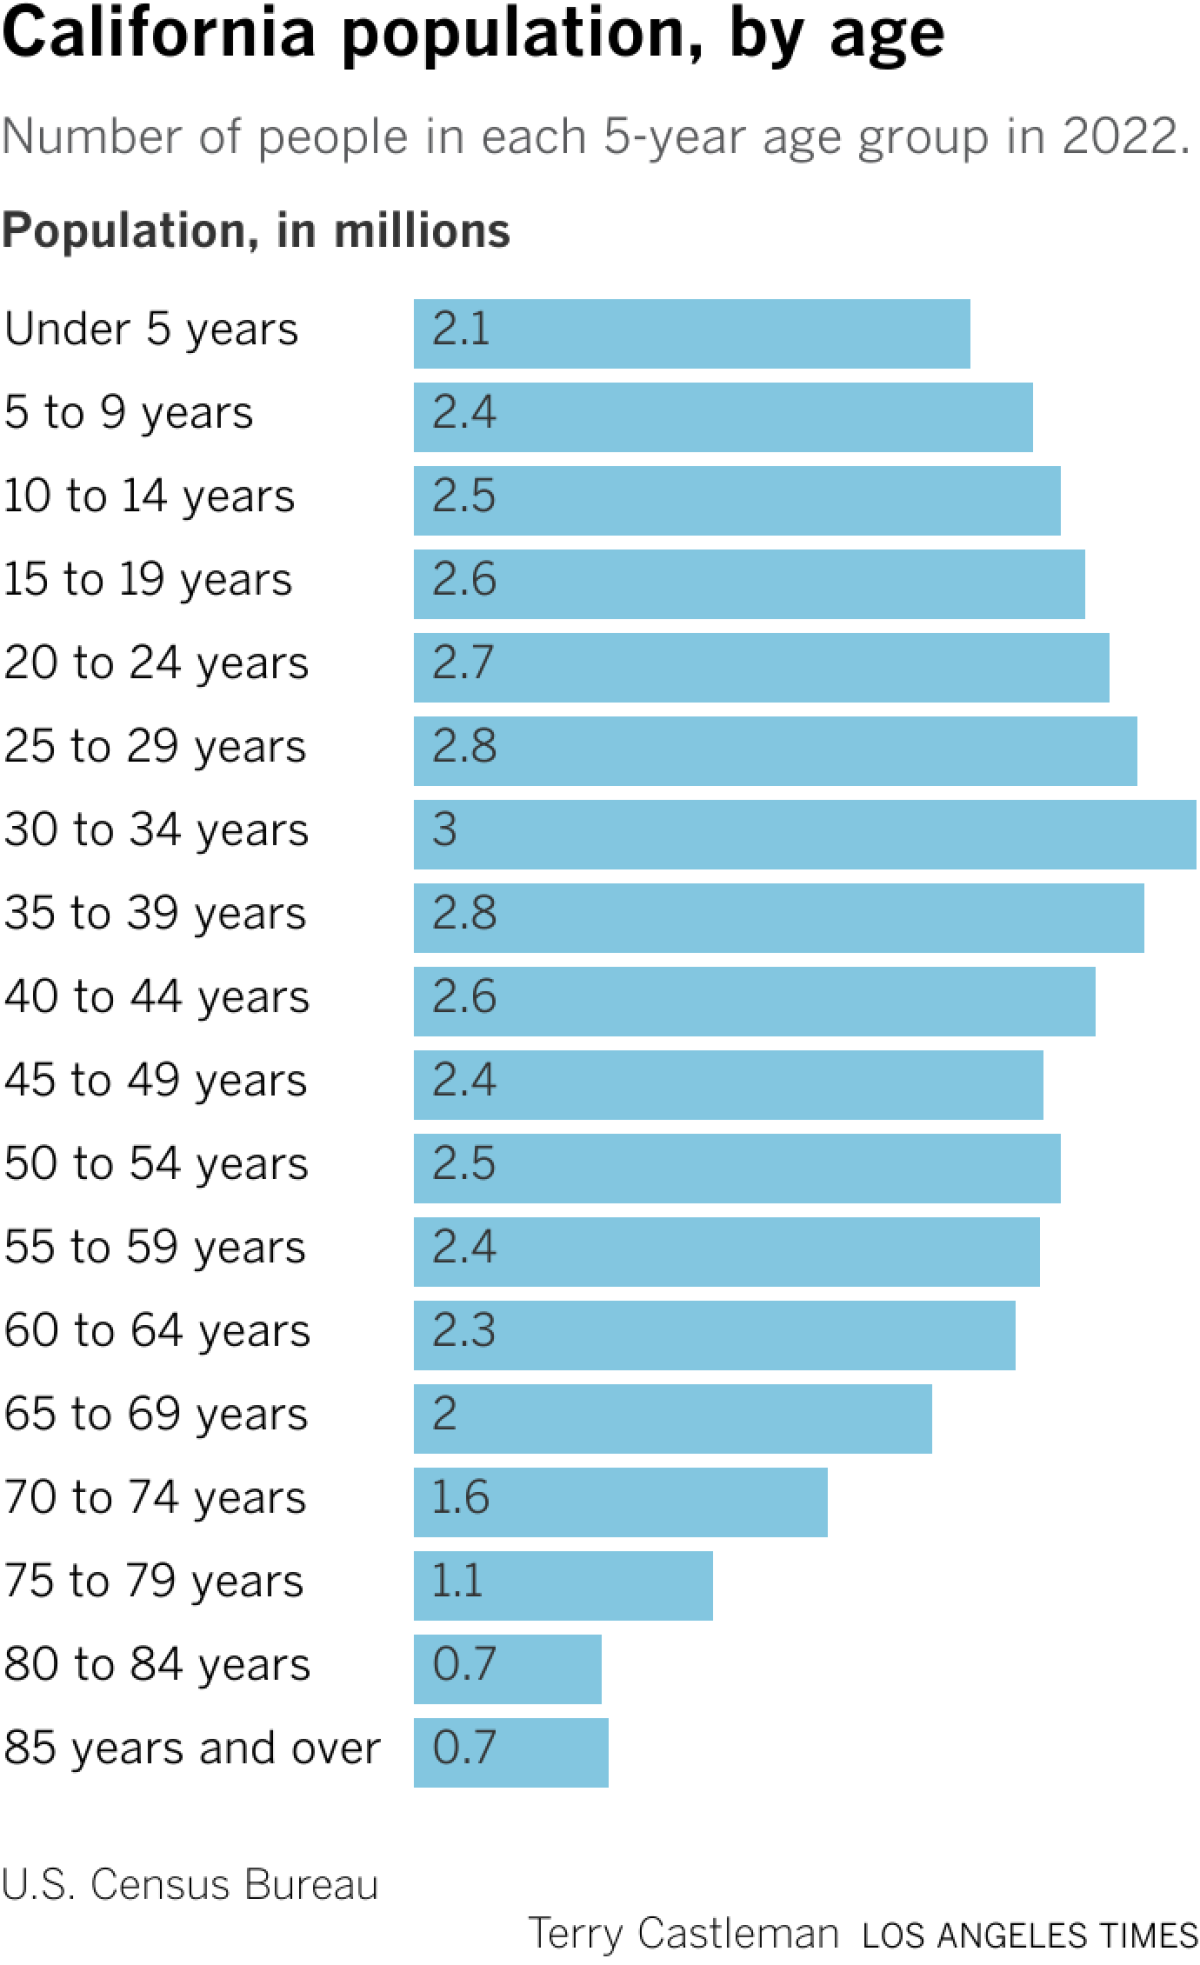 Bar chart shows California's population, by 5-year age groups. The 30 to 34 year old age group is the largest.